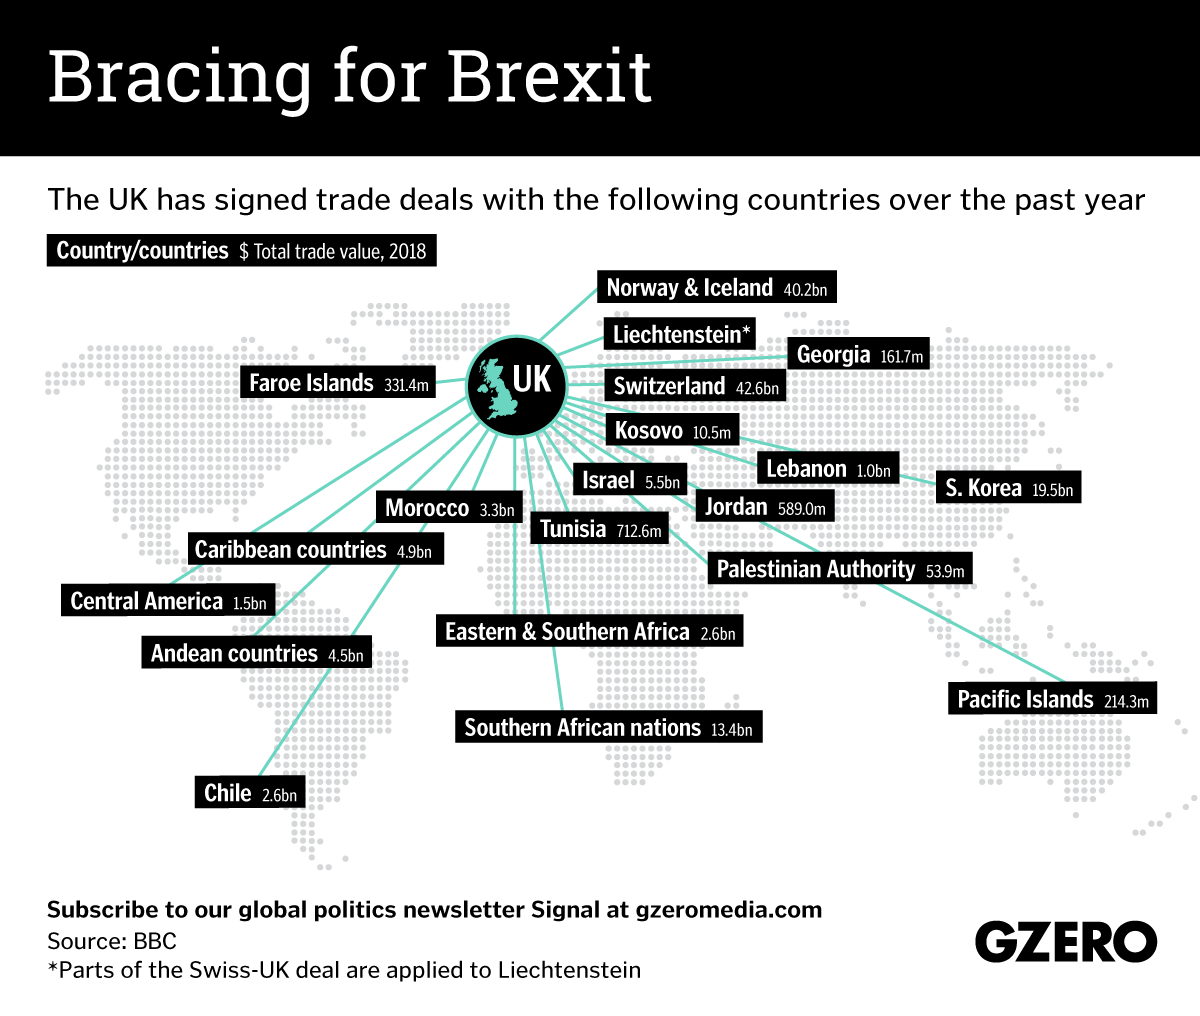 Graphic Truth: Bracing for Brexit